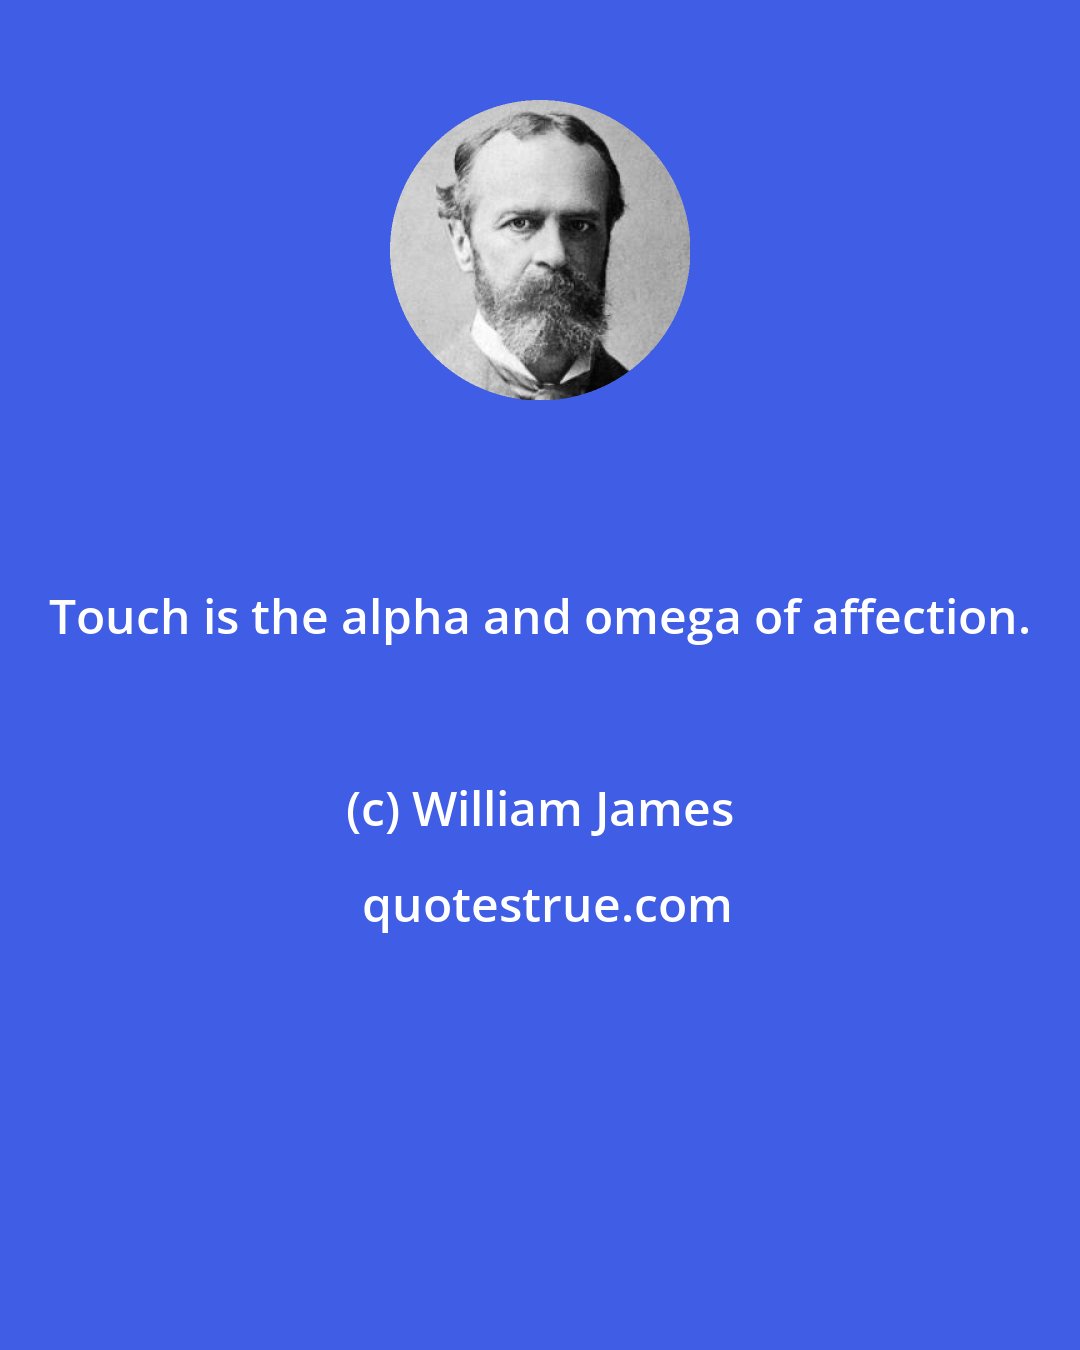 William James: Touch is the alpha and omega of affection.